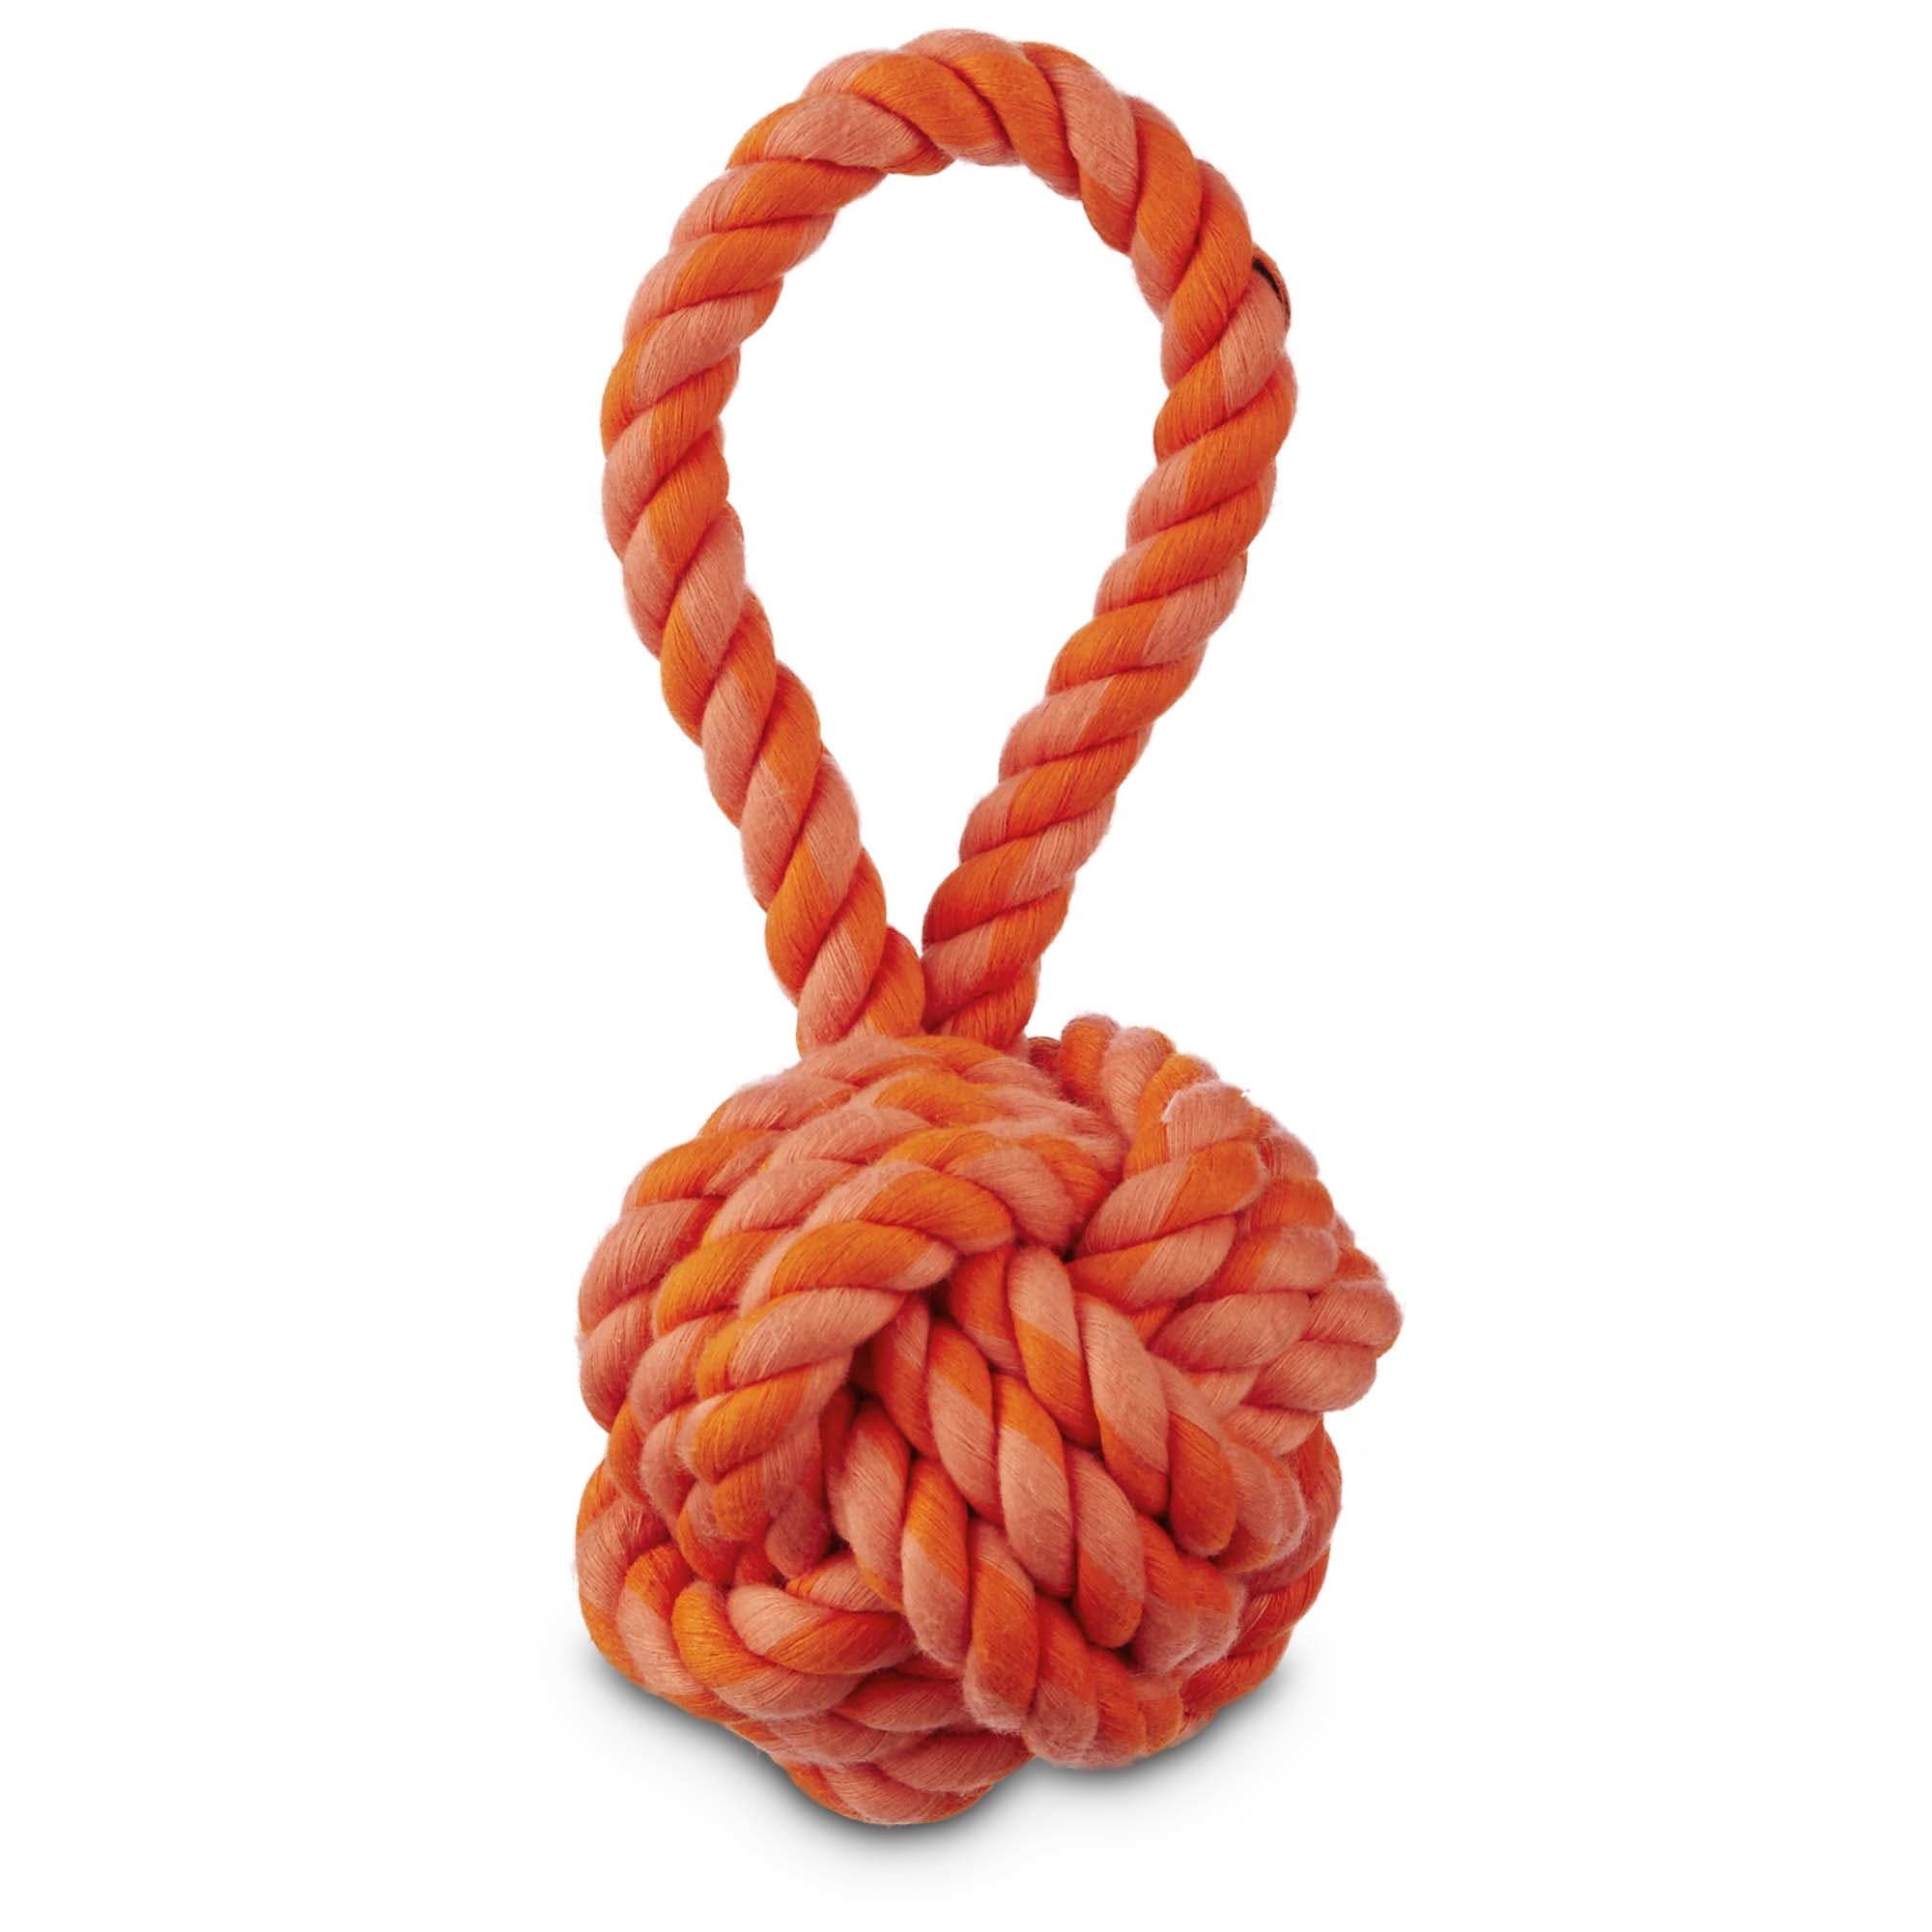 Tug Red Rope Ball Dog Toy With Handle 